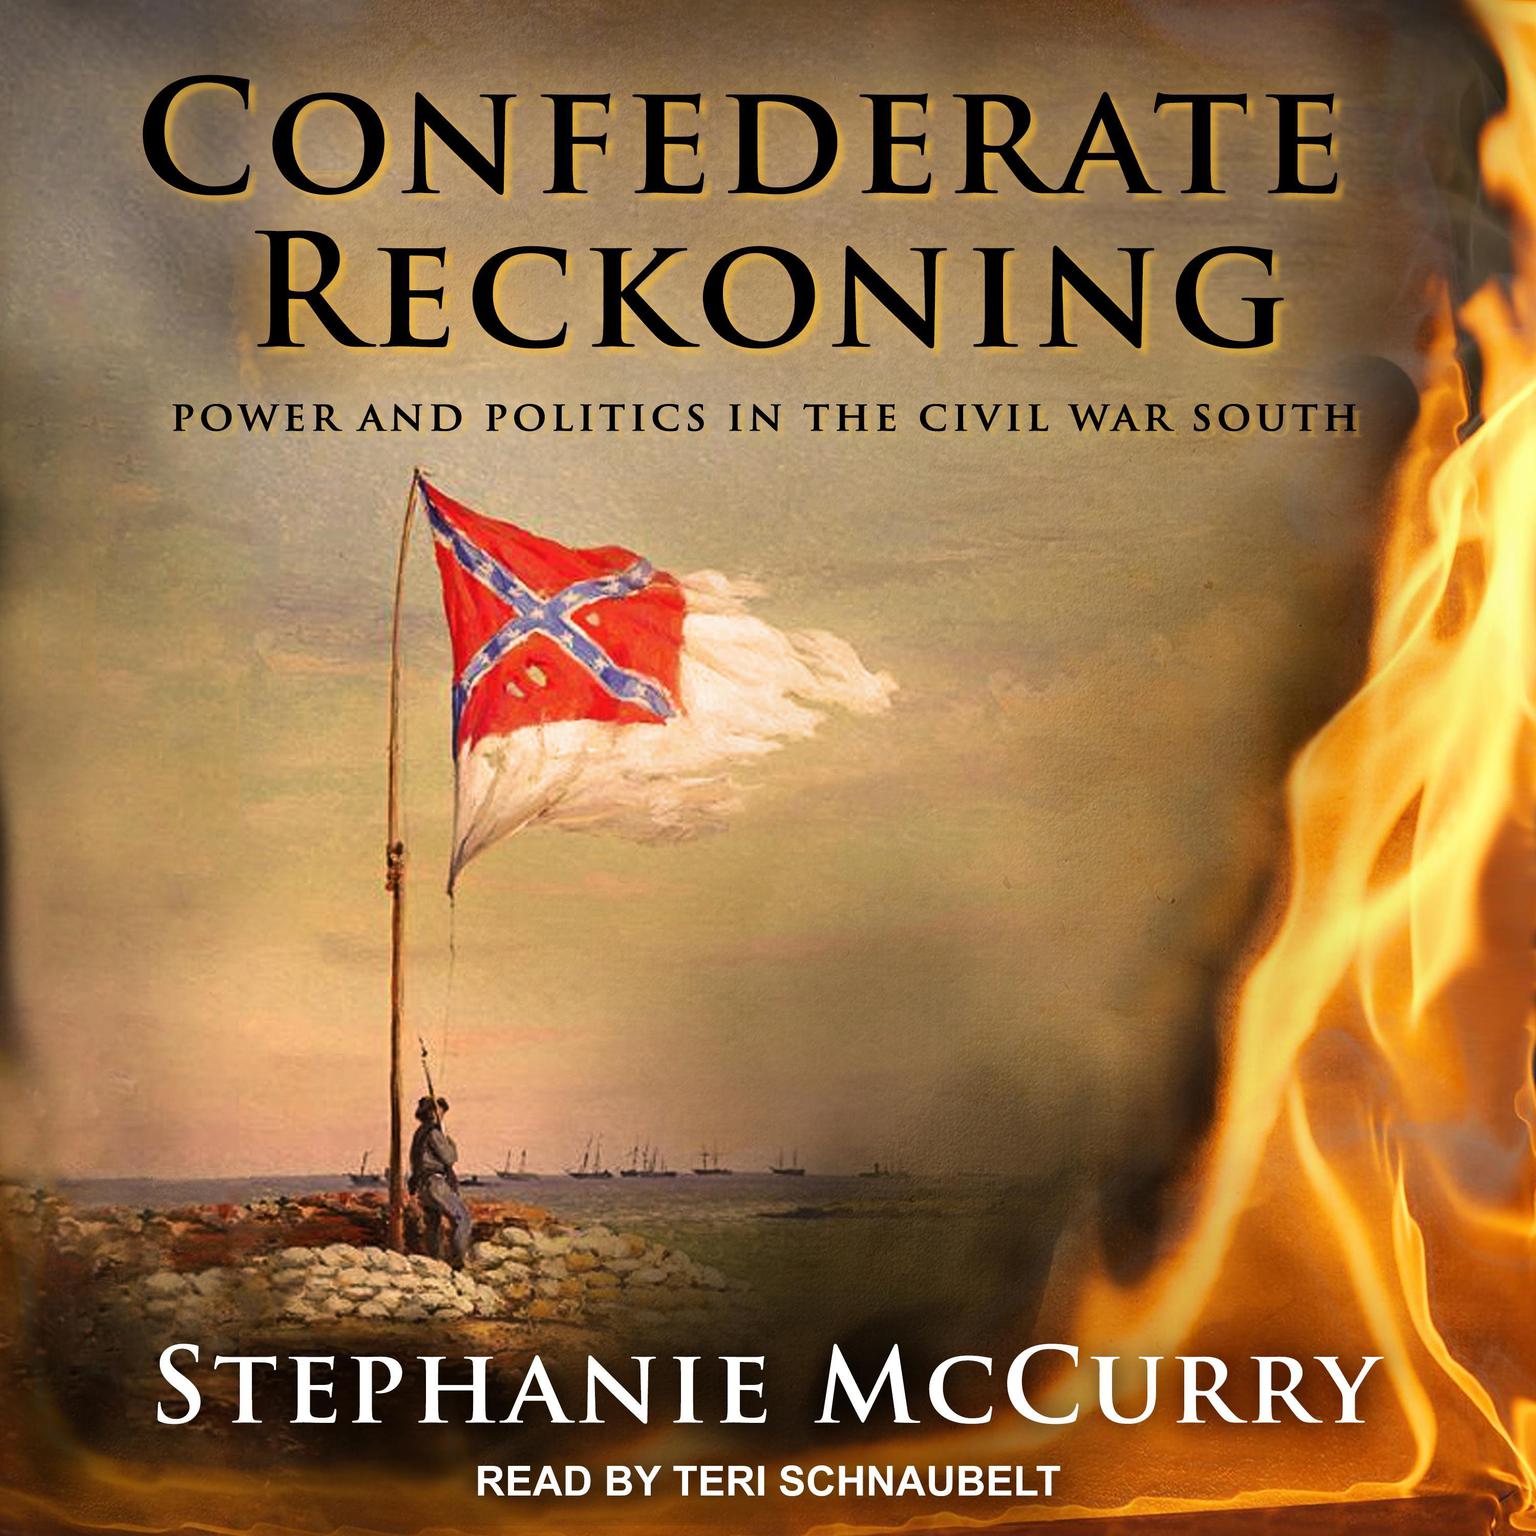 Confederate Reckoning: Power and Politics in the Civil War South Audiobook, by Stephanie McCurry